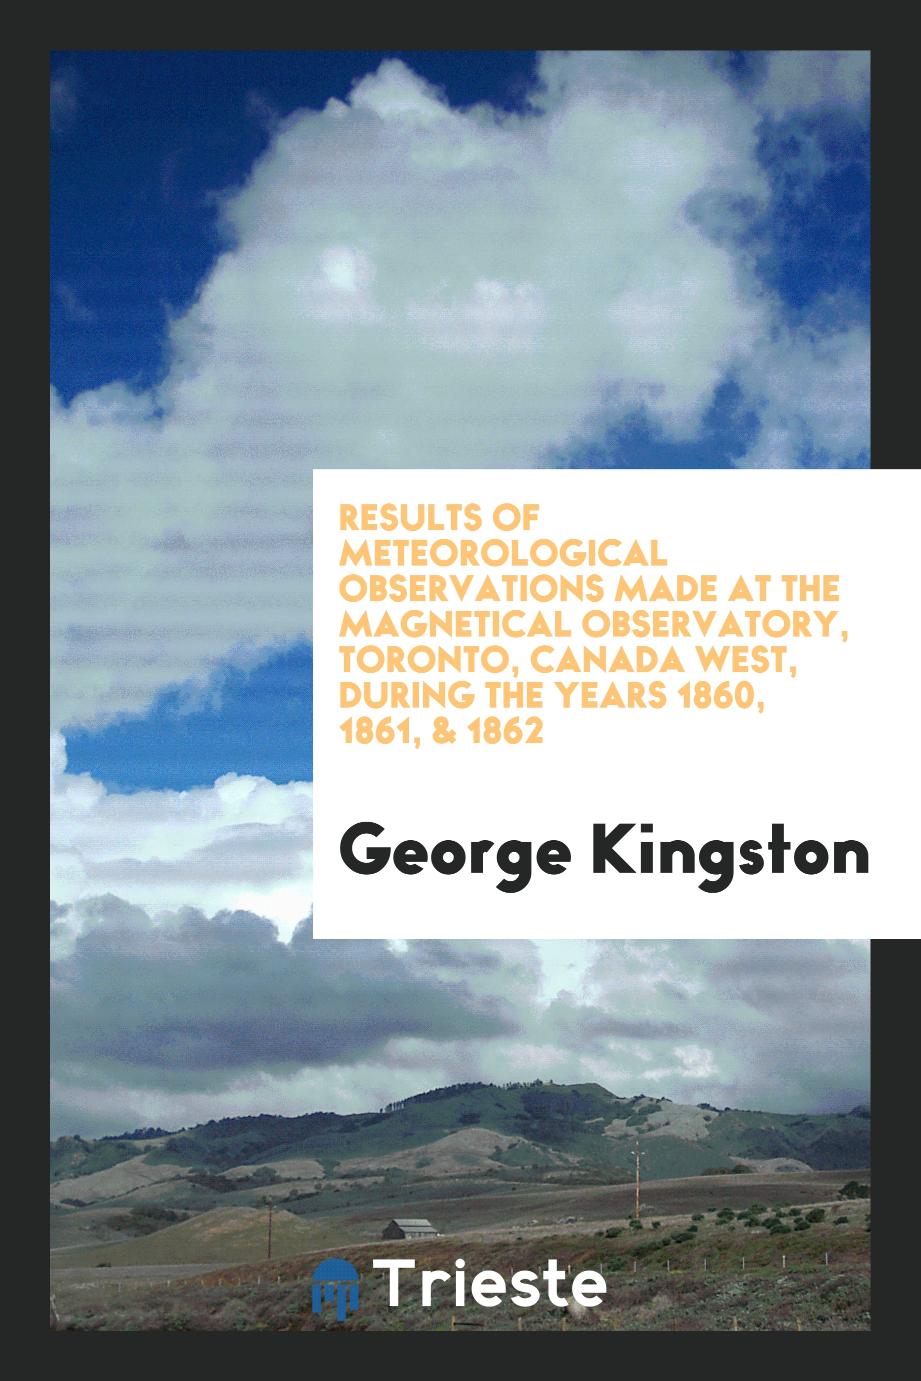 Results of Meteorological Observations Made at the Magnetical Observatory, Toronto, Canada West, During the Years 1860, 1861, & 1862